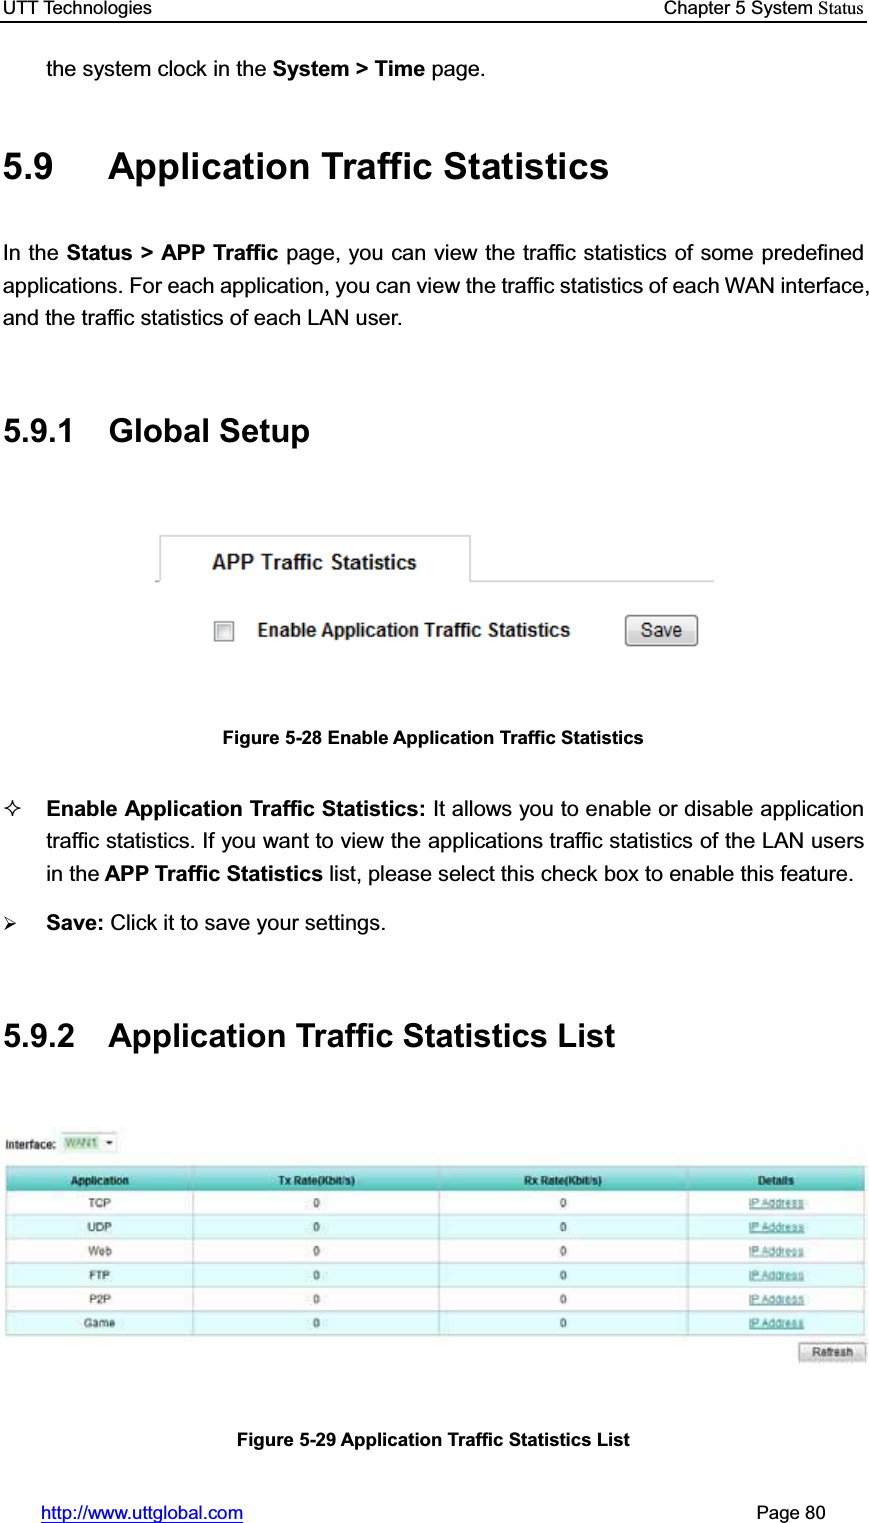 UTT Technologies    Chapter 5 System Statushttp://www.uttglobal.com                                                       Page 80 the system clock in the System &gt; Time page. 5.9 Application Traffic Statistics In the Status &gt; APP Traffic page, you can view the traffic statistics of some predefinedapplications. For each application, you can view the traffic statistics of each WAN interface, and the traffic statistics of each LAN user.   5.9.1 Global Setup Figure 5-28 Enable Application Traffic Statistics Enable Application Traffic Statistics: It allows you to enable or disable application traffic statistics. If you want to view the applications traffic statistics of the LAN users in the APP Traffic Statistics list, please select this check box to enable this feature. ¾Save: Click it to save your settings.5.9.2  Application Traffic Statistics List Figure 5-29 Application Traffic Statistics List 